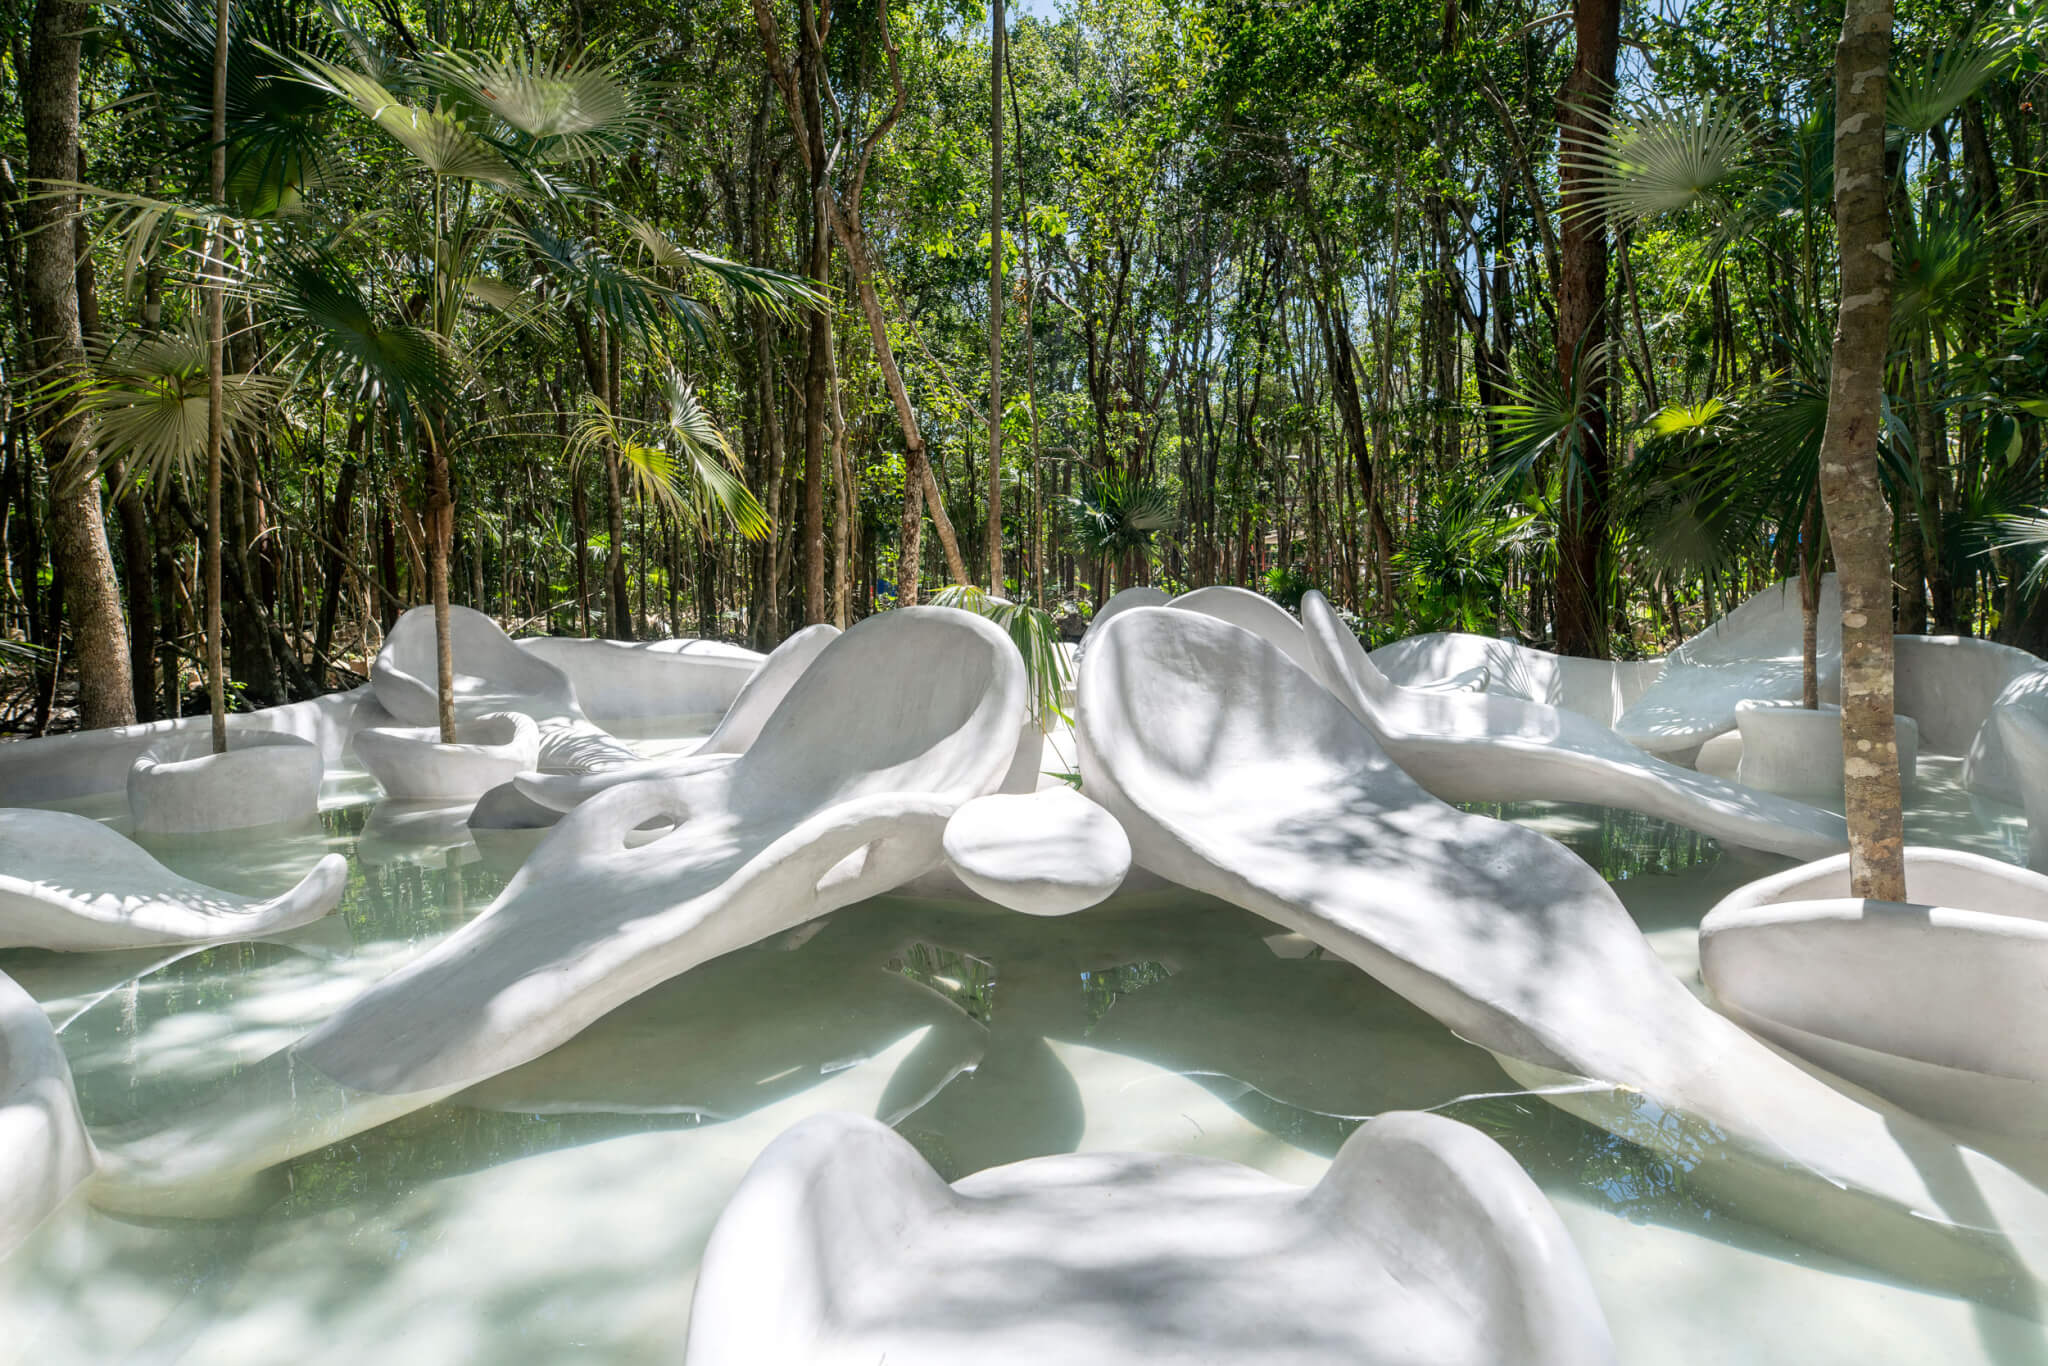 organic-shaped sculptures in water feature are part of the En-chanted Garden